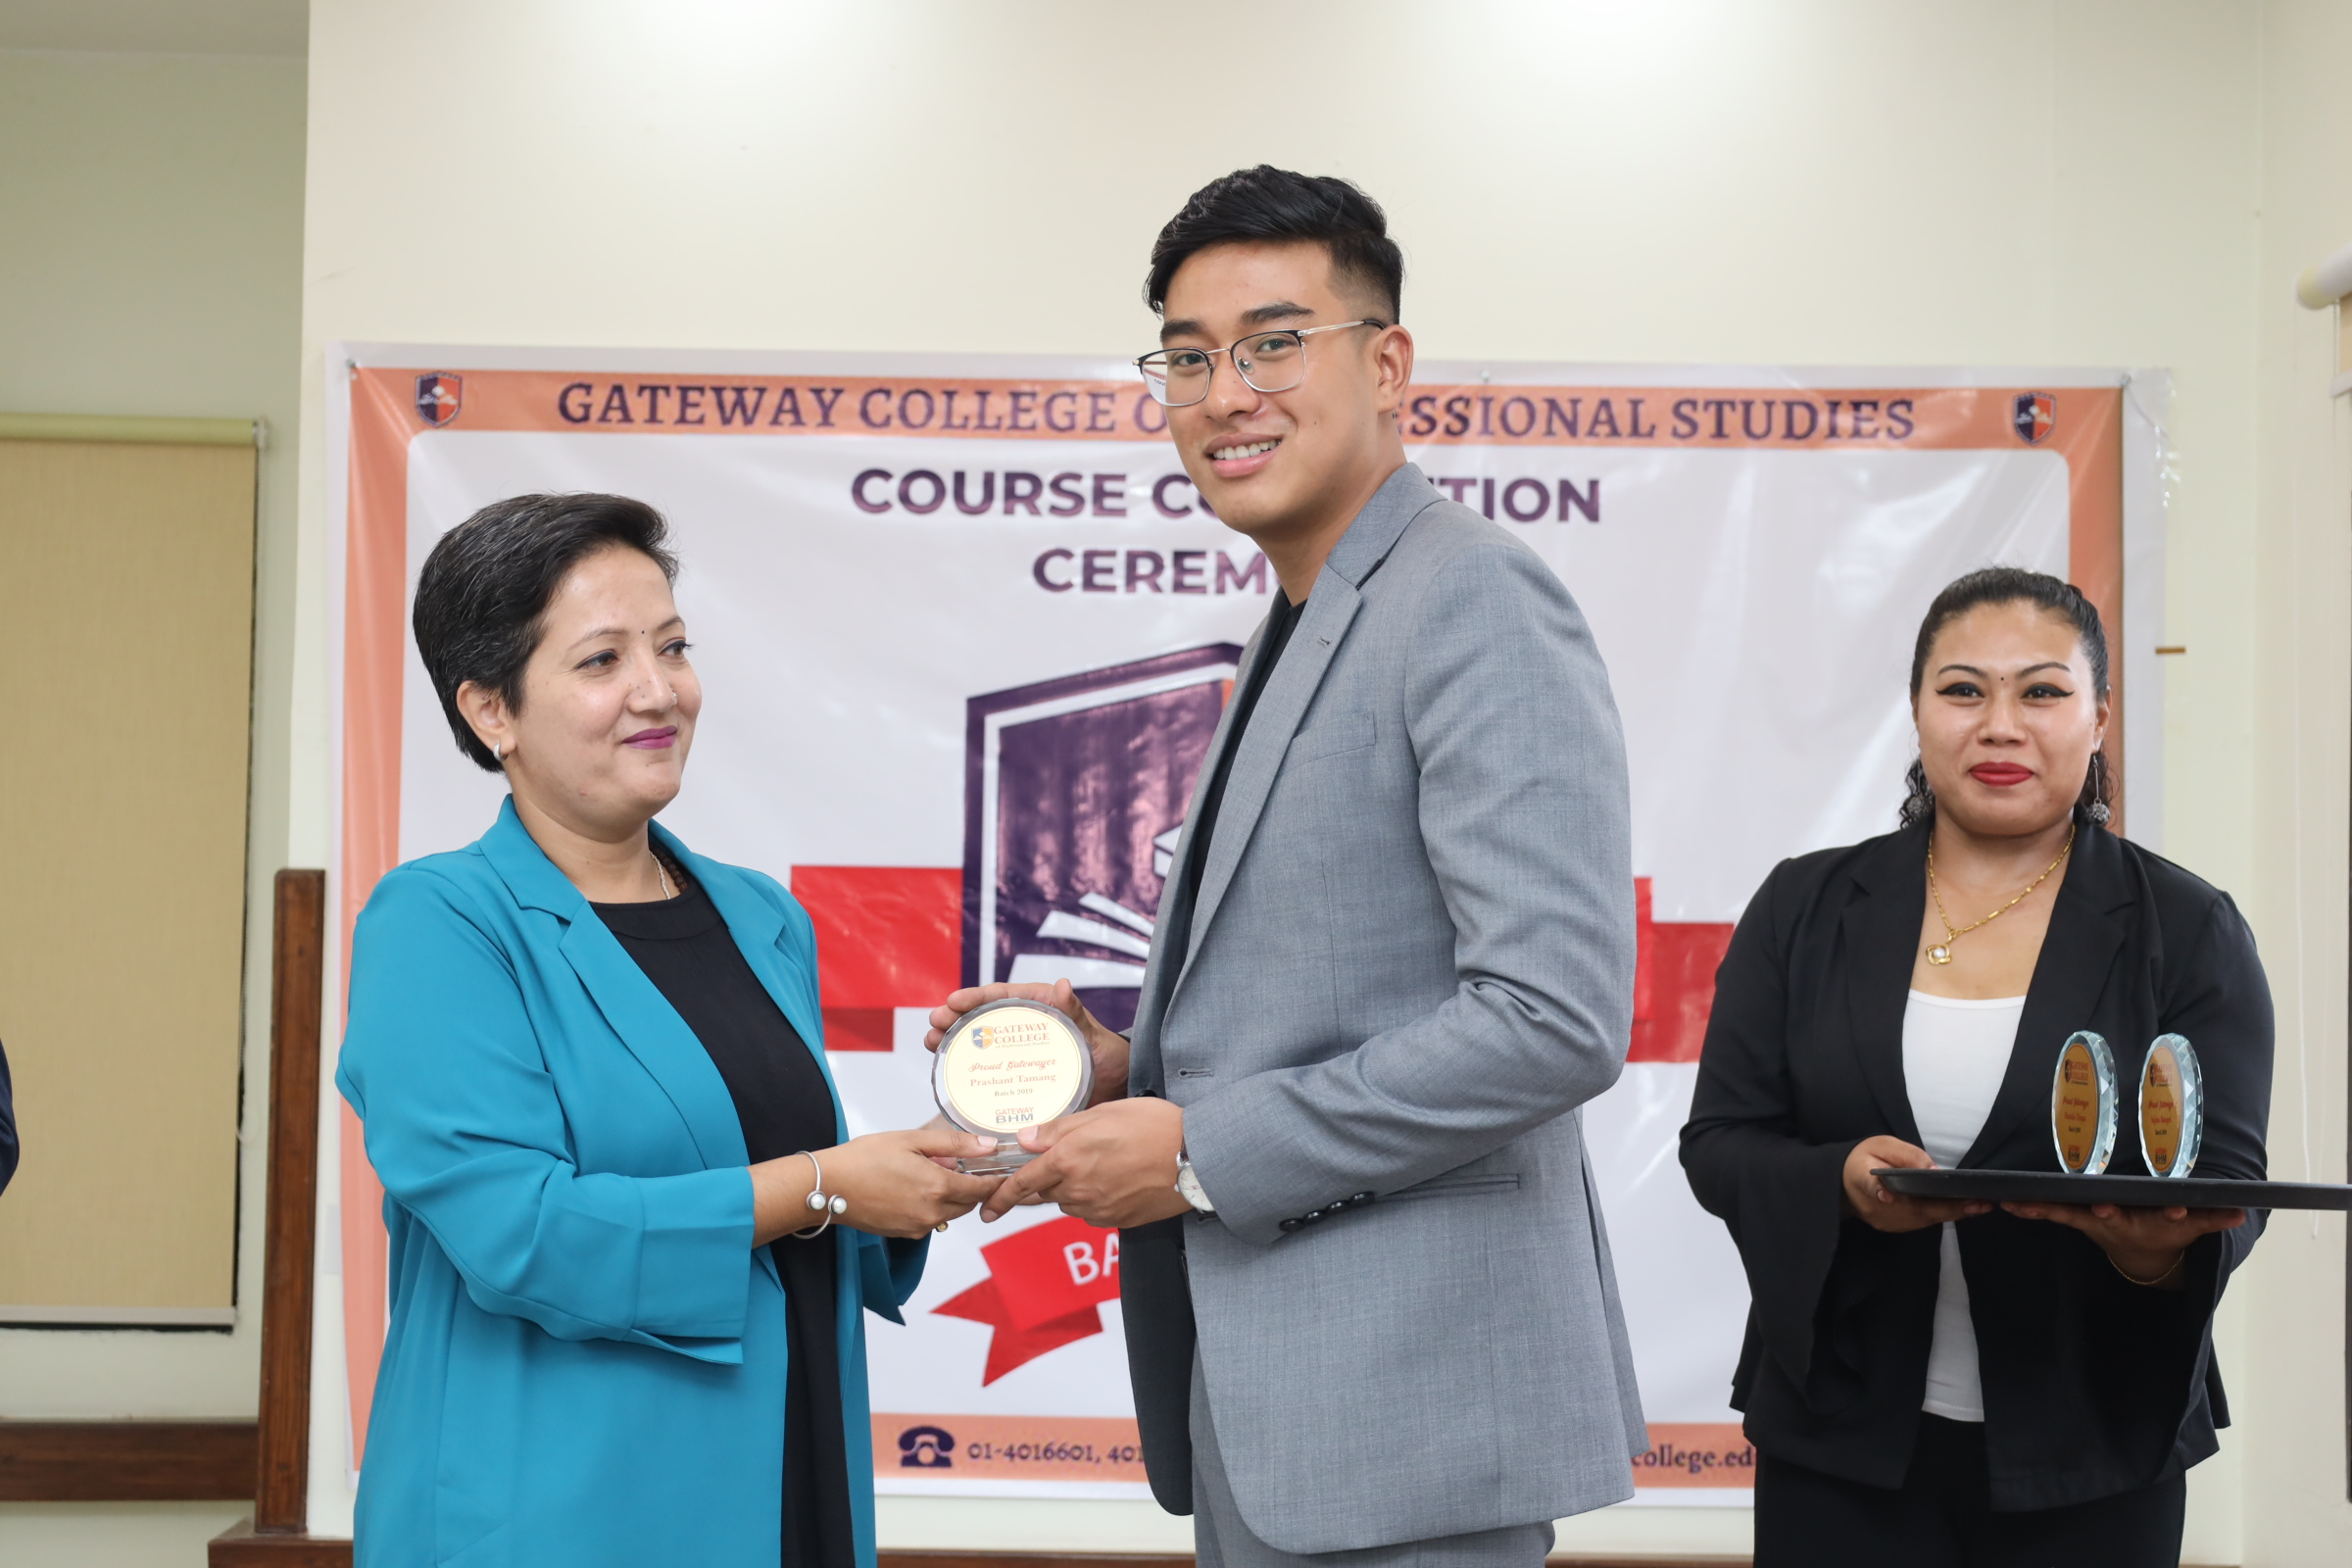 Token of Proud Gatewayer for Batch 2019 at Course Completion Ceremony